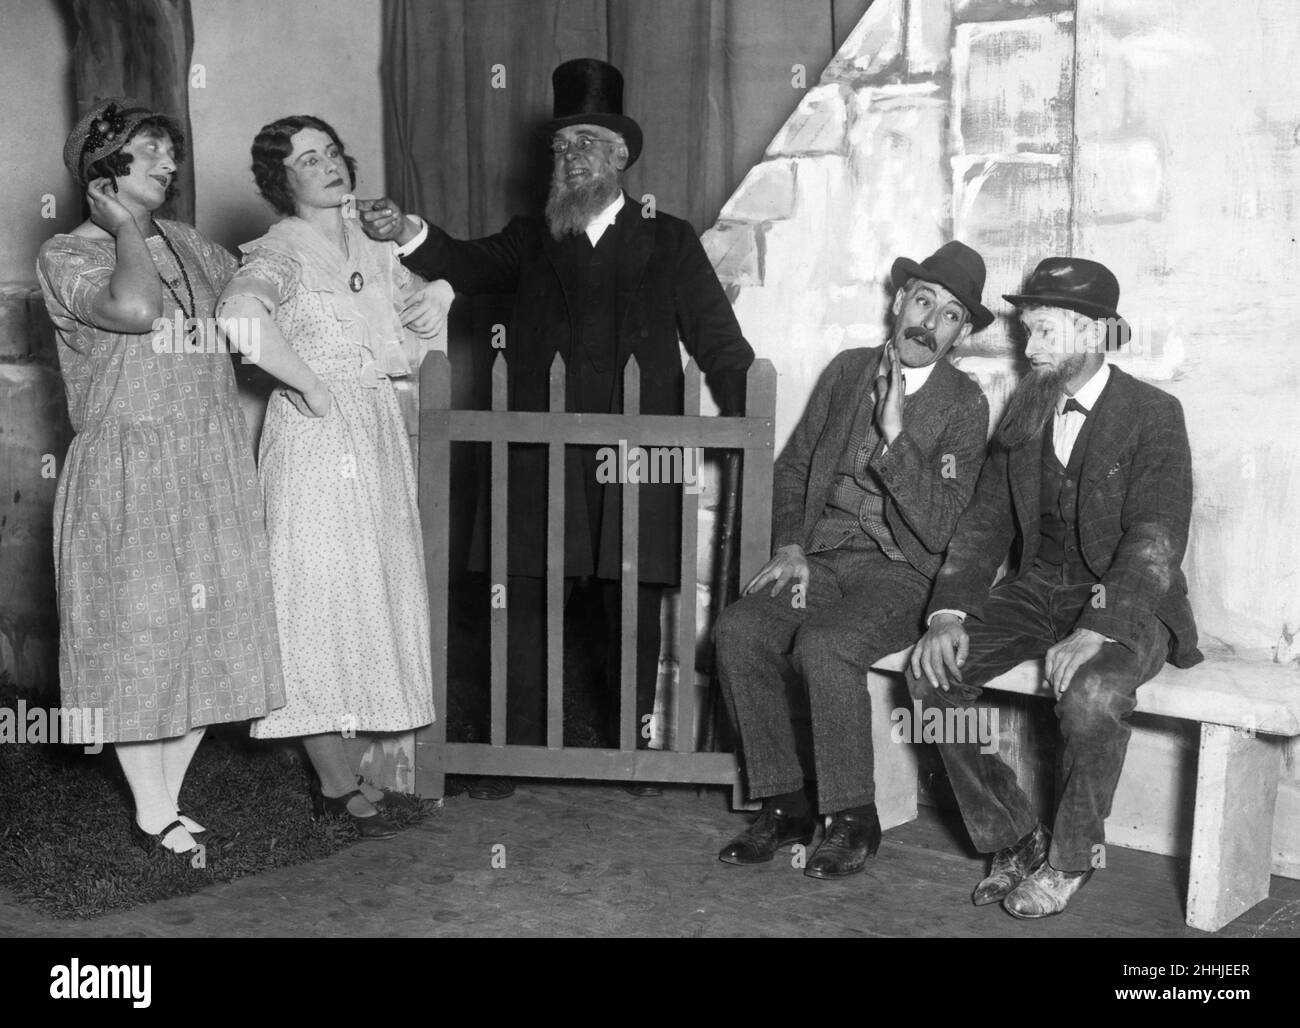 Winifred Evans, Joan Maude, Fewless Llewellyn, H R Hignett and William Pringle seen here in a scene from 'Taffy' by Caradox Evans at the 'Q' Theatre. 8th September 1925 Stock Photo